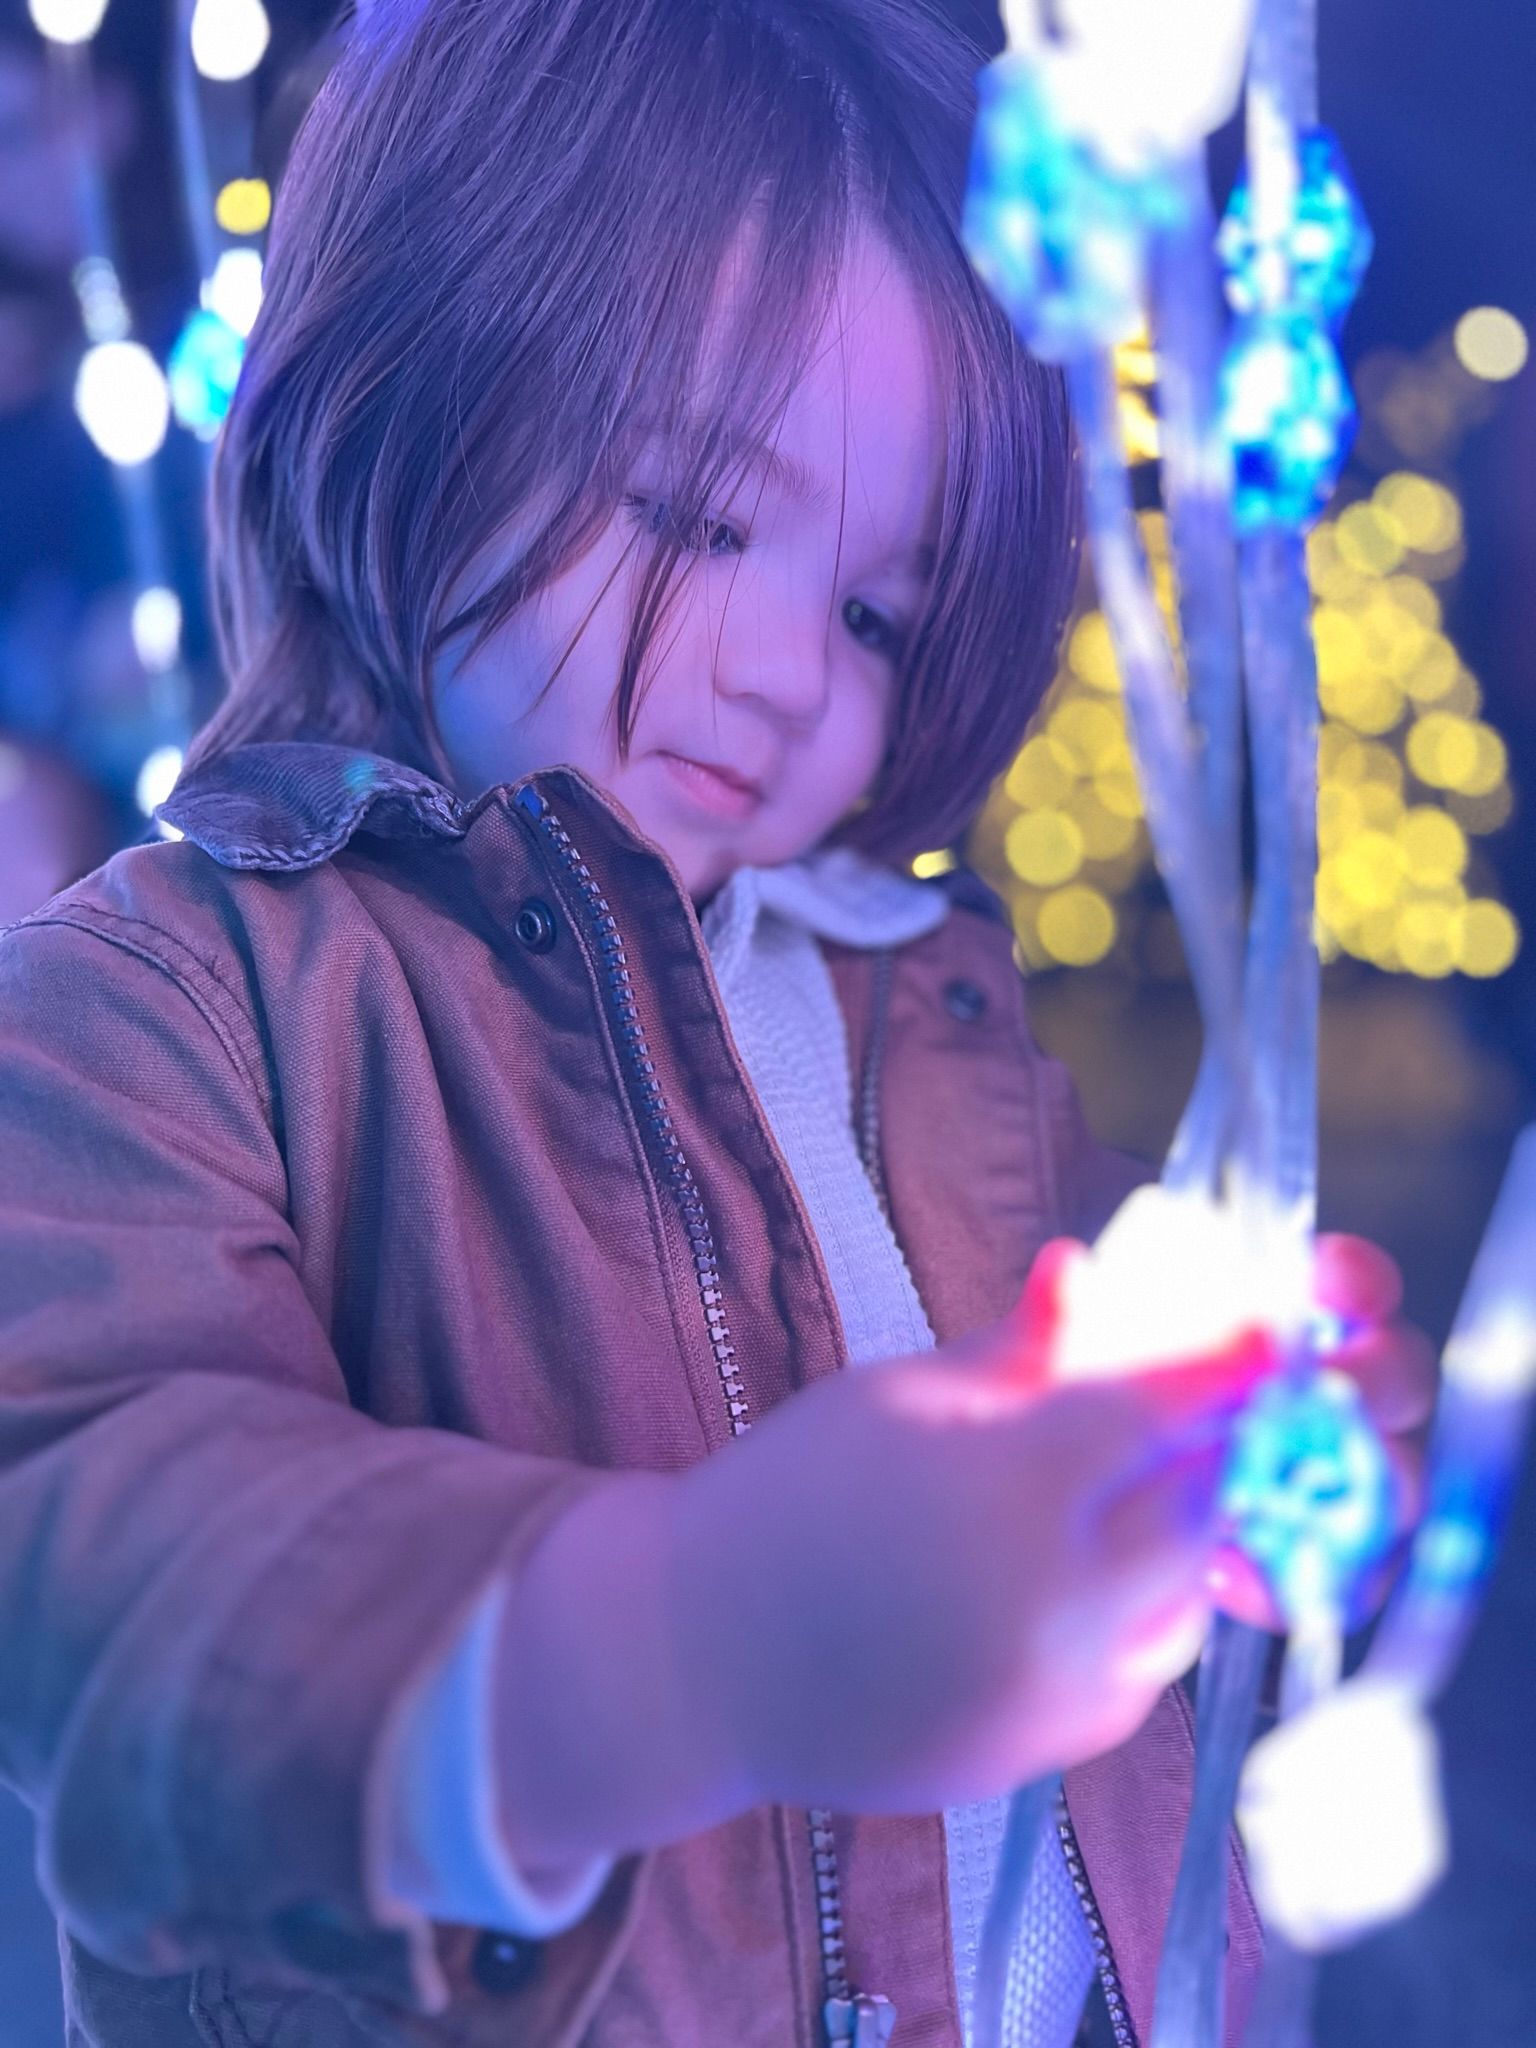 Little girl holding a glowing object